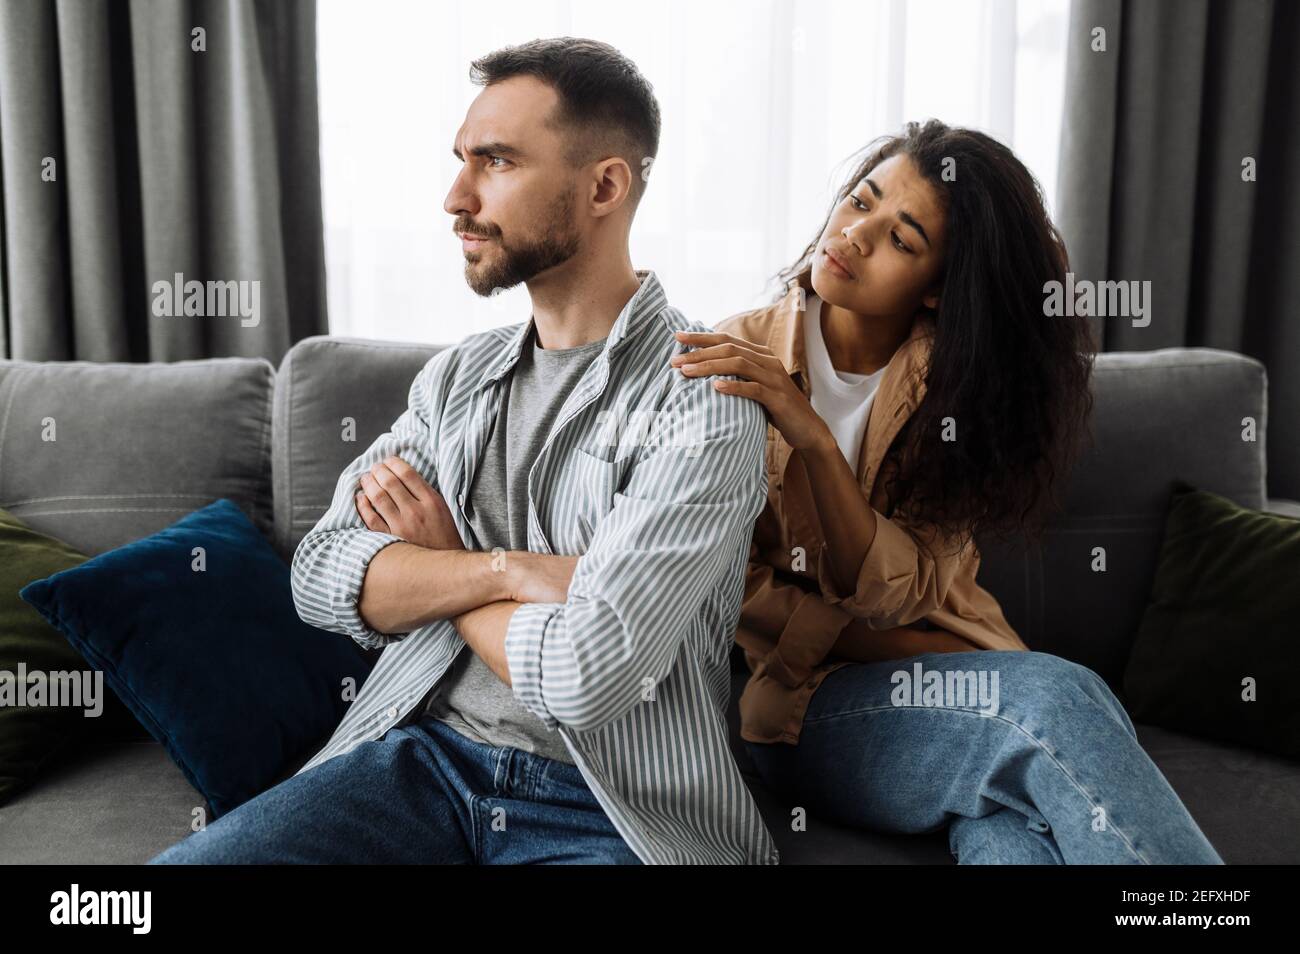 A married couple finds out the relationship, a quarrel between lovers. Multiracial couple in love quarreling at home on couch over household or financial problems. Domestic family conflicts concept Stock Photo